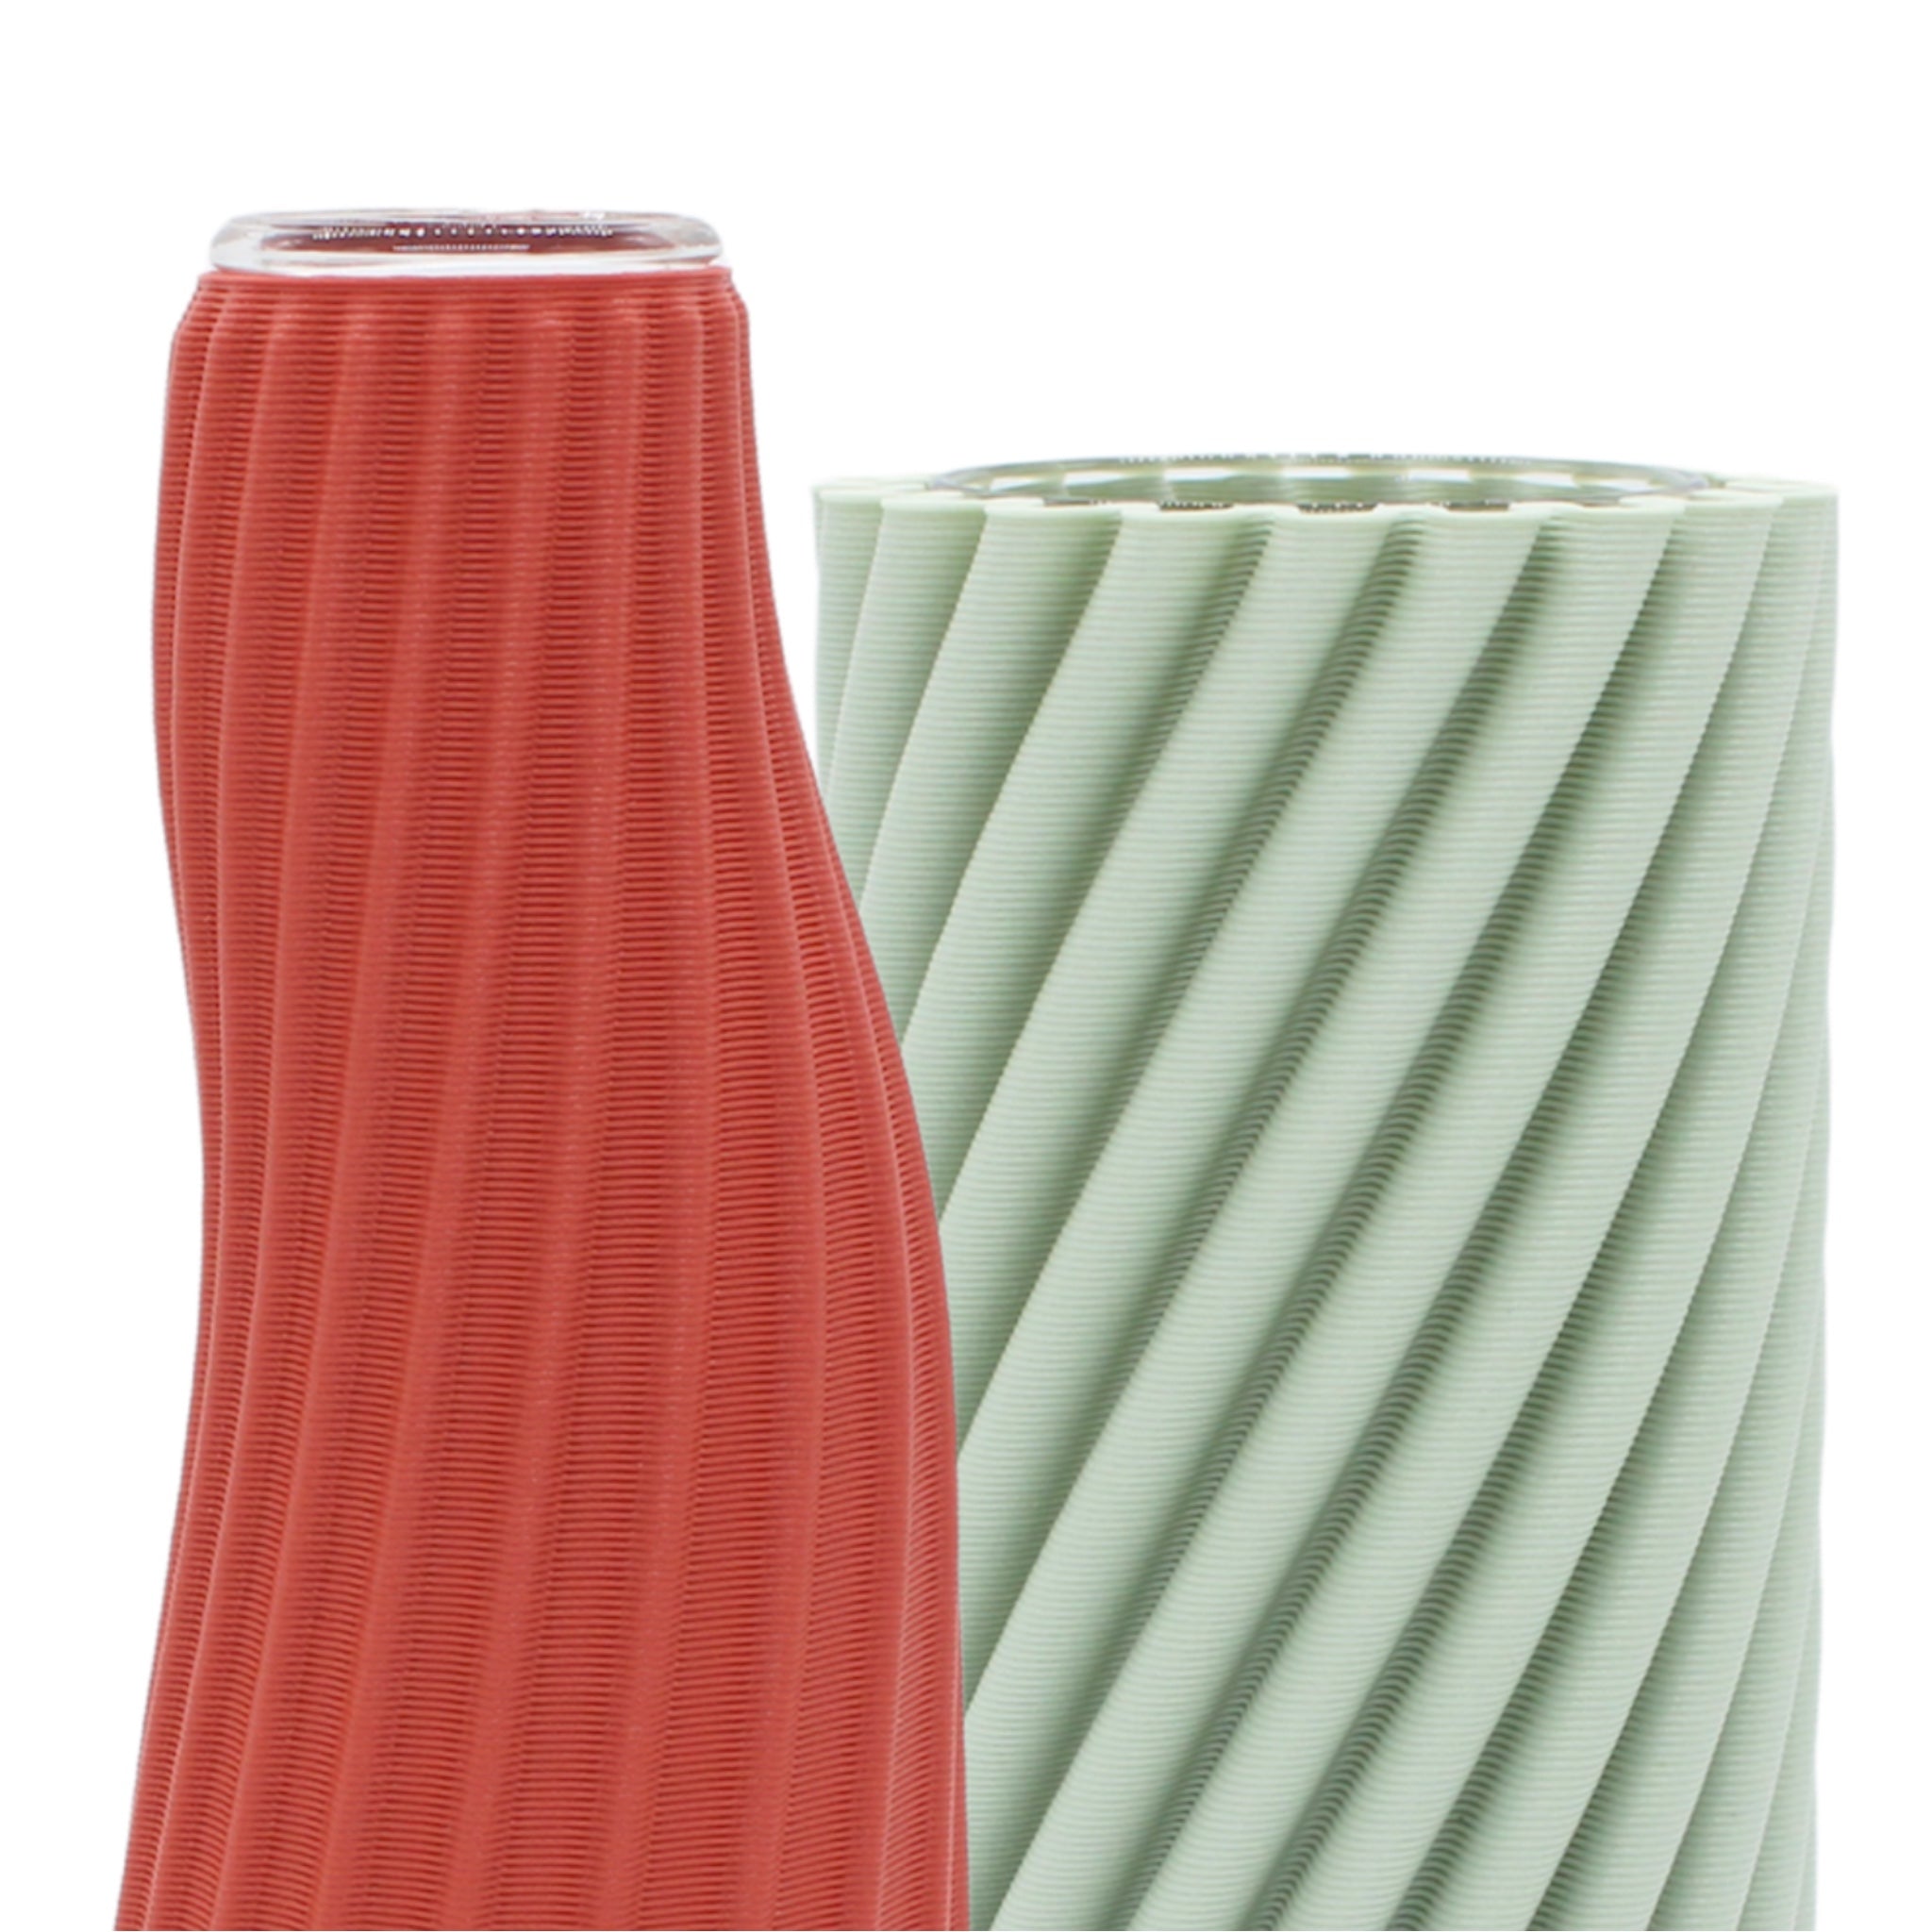 Gerno vase and Strofi vase made with recycled plastic by Deme Design